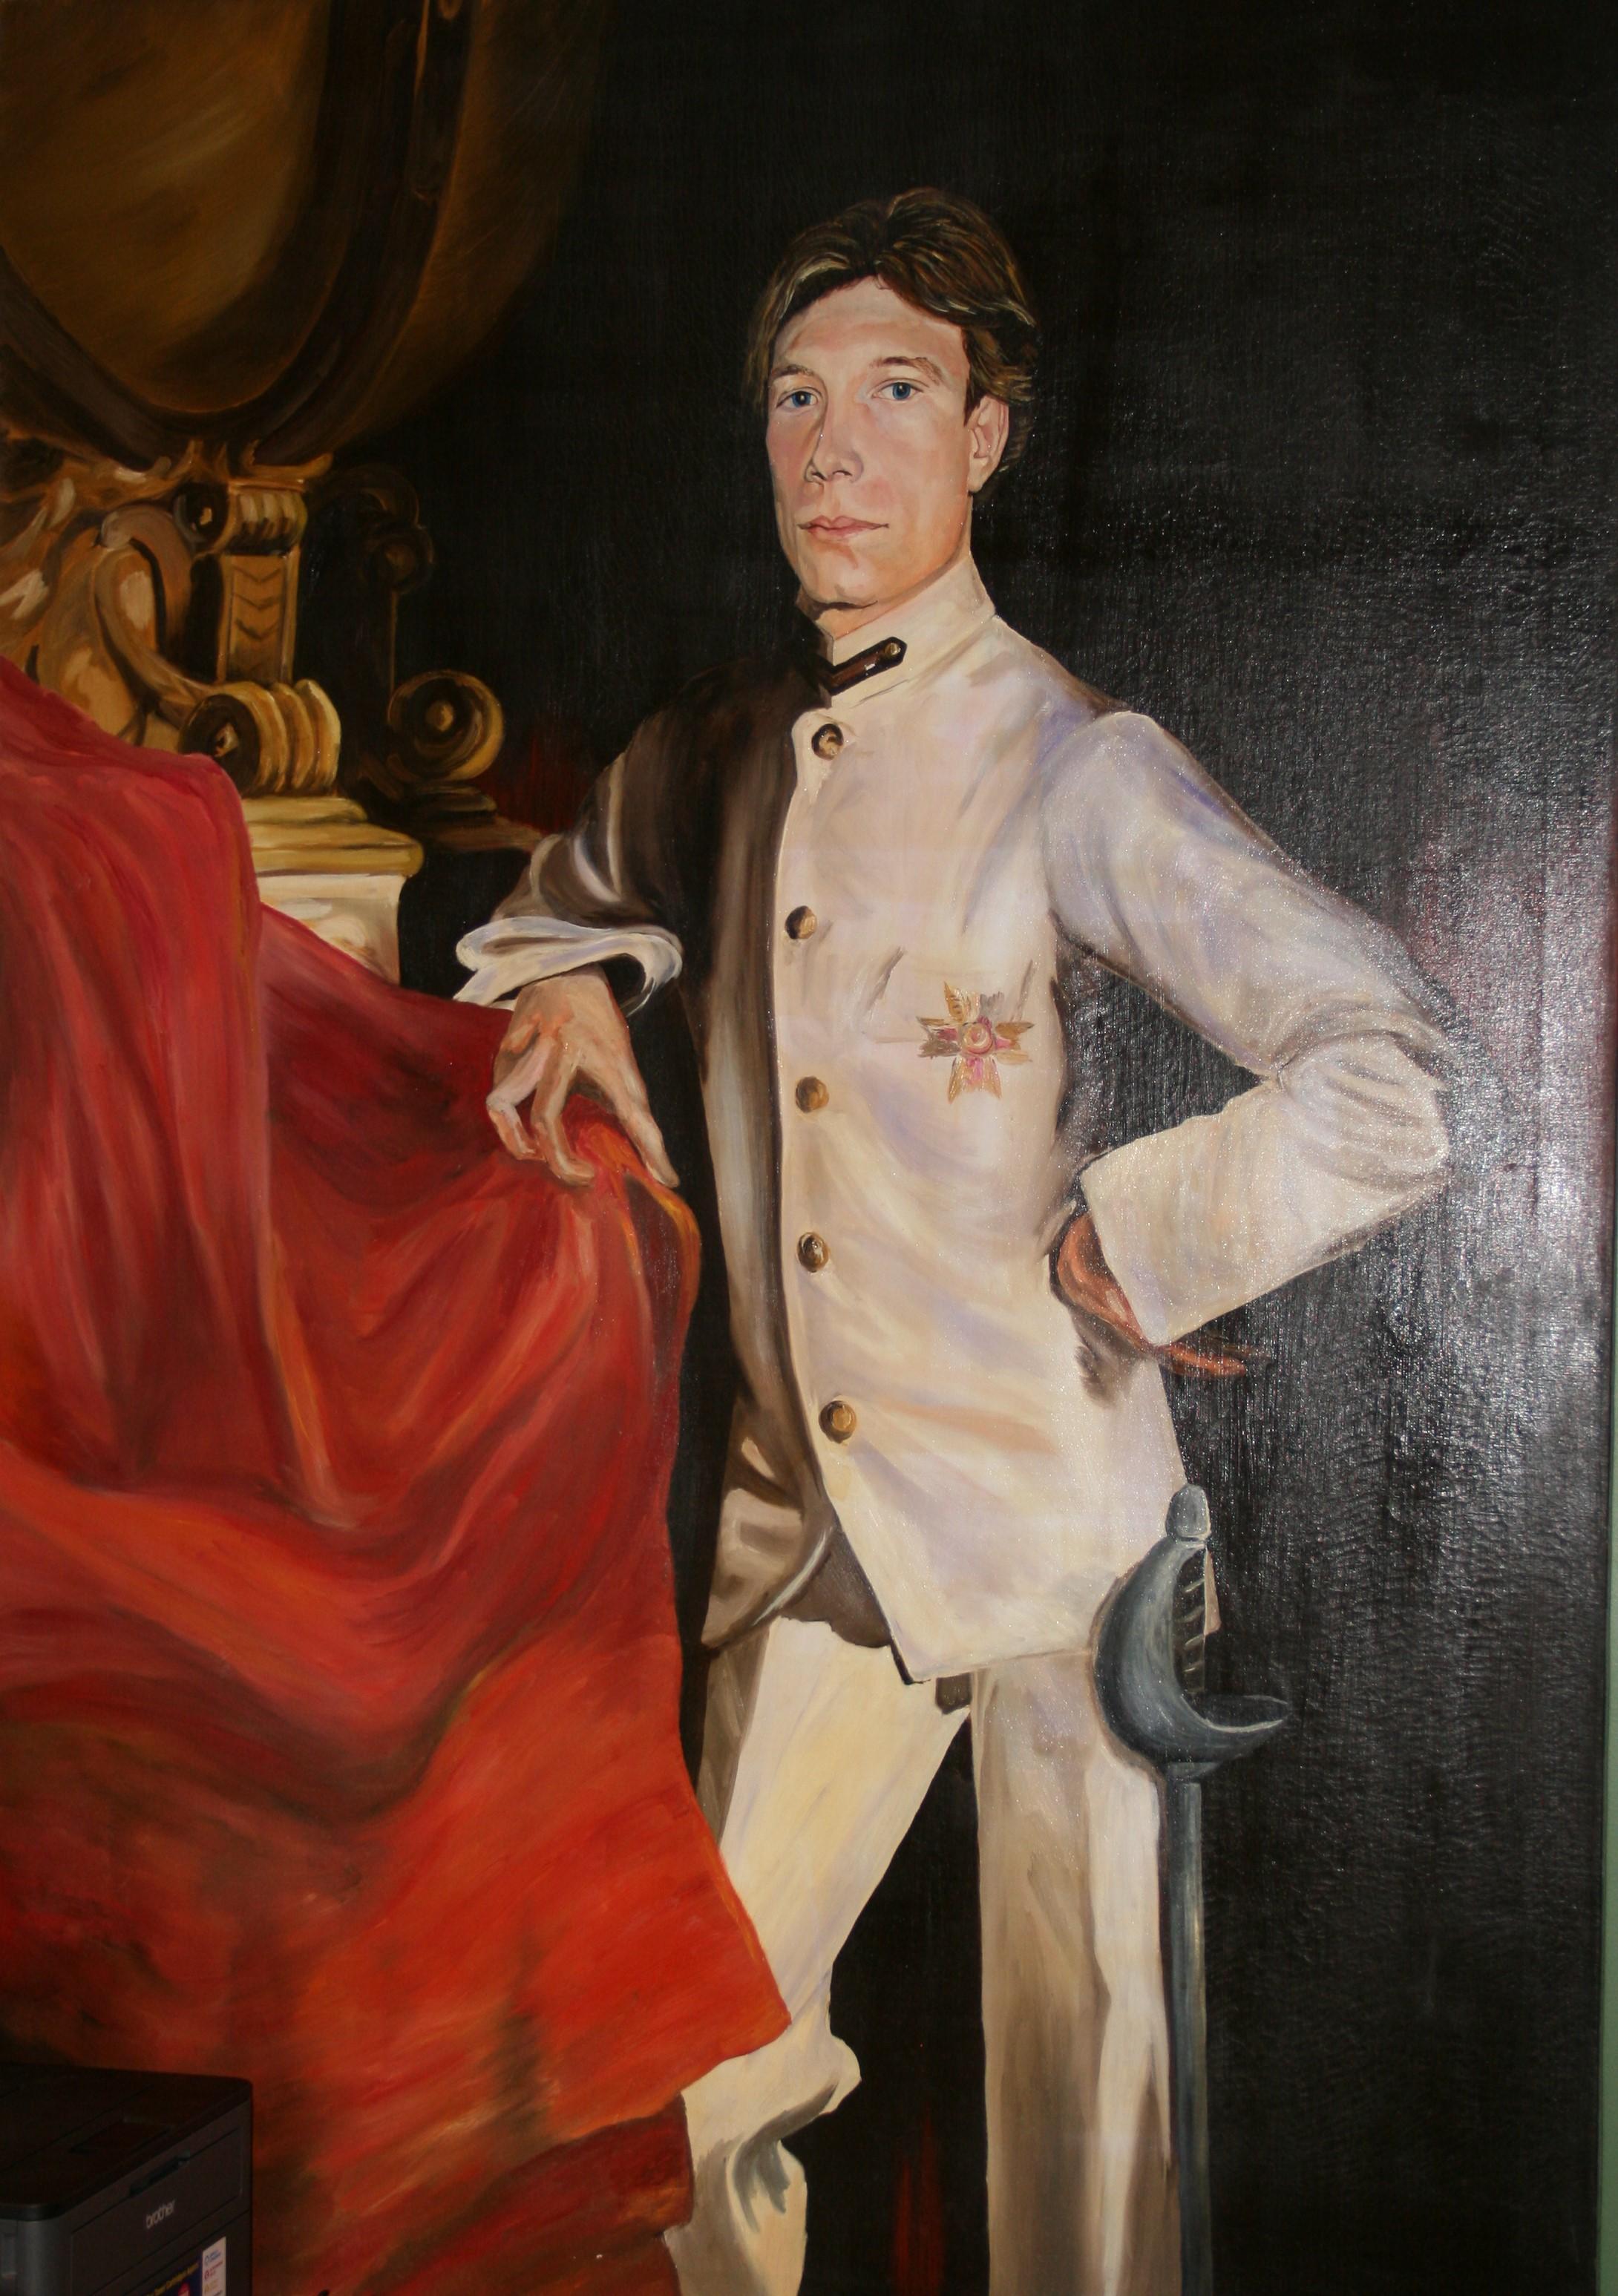 Unknown Portrait Painting - Vintage Italian Full Length Portrait Oil Painting "The English Gentleman"